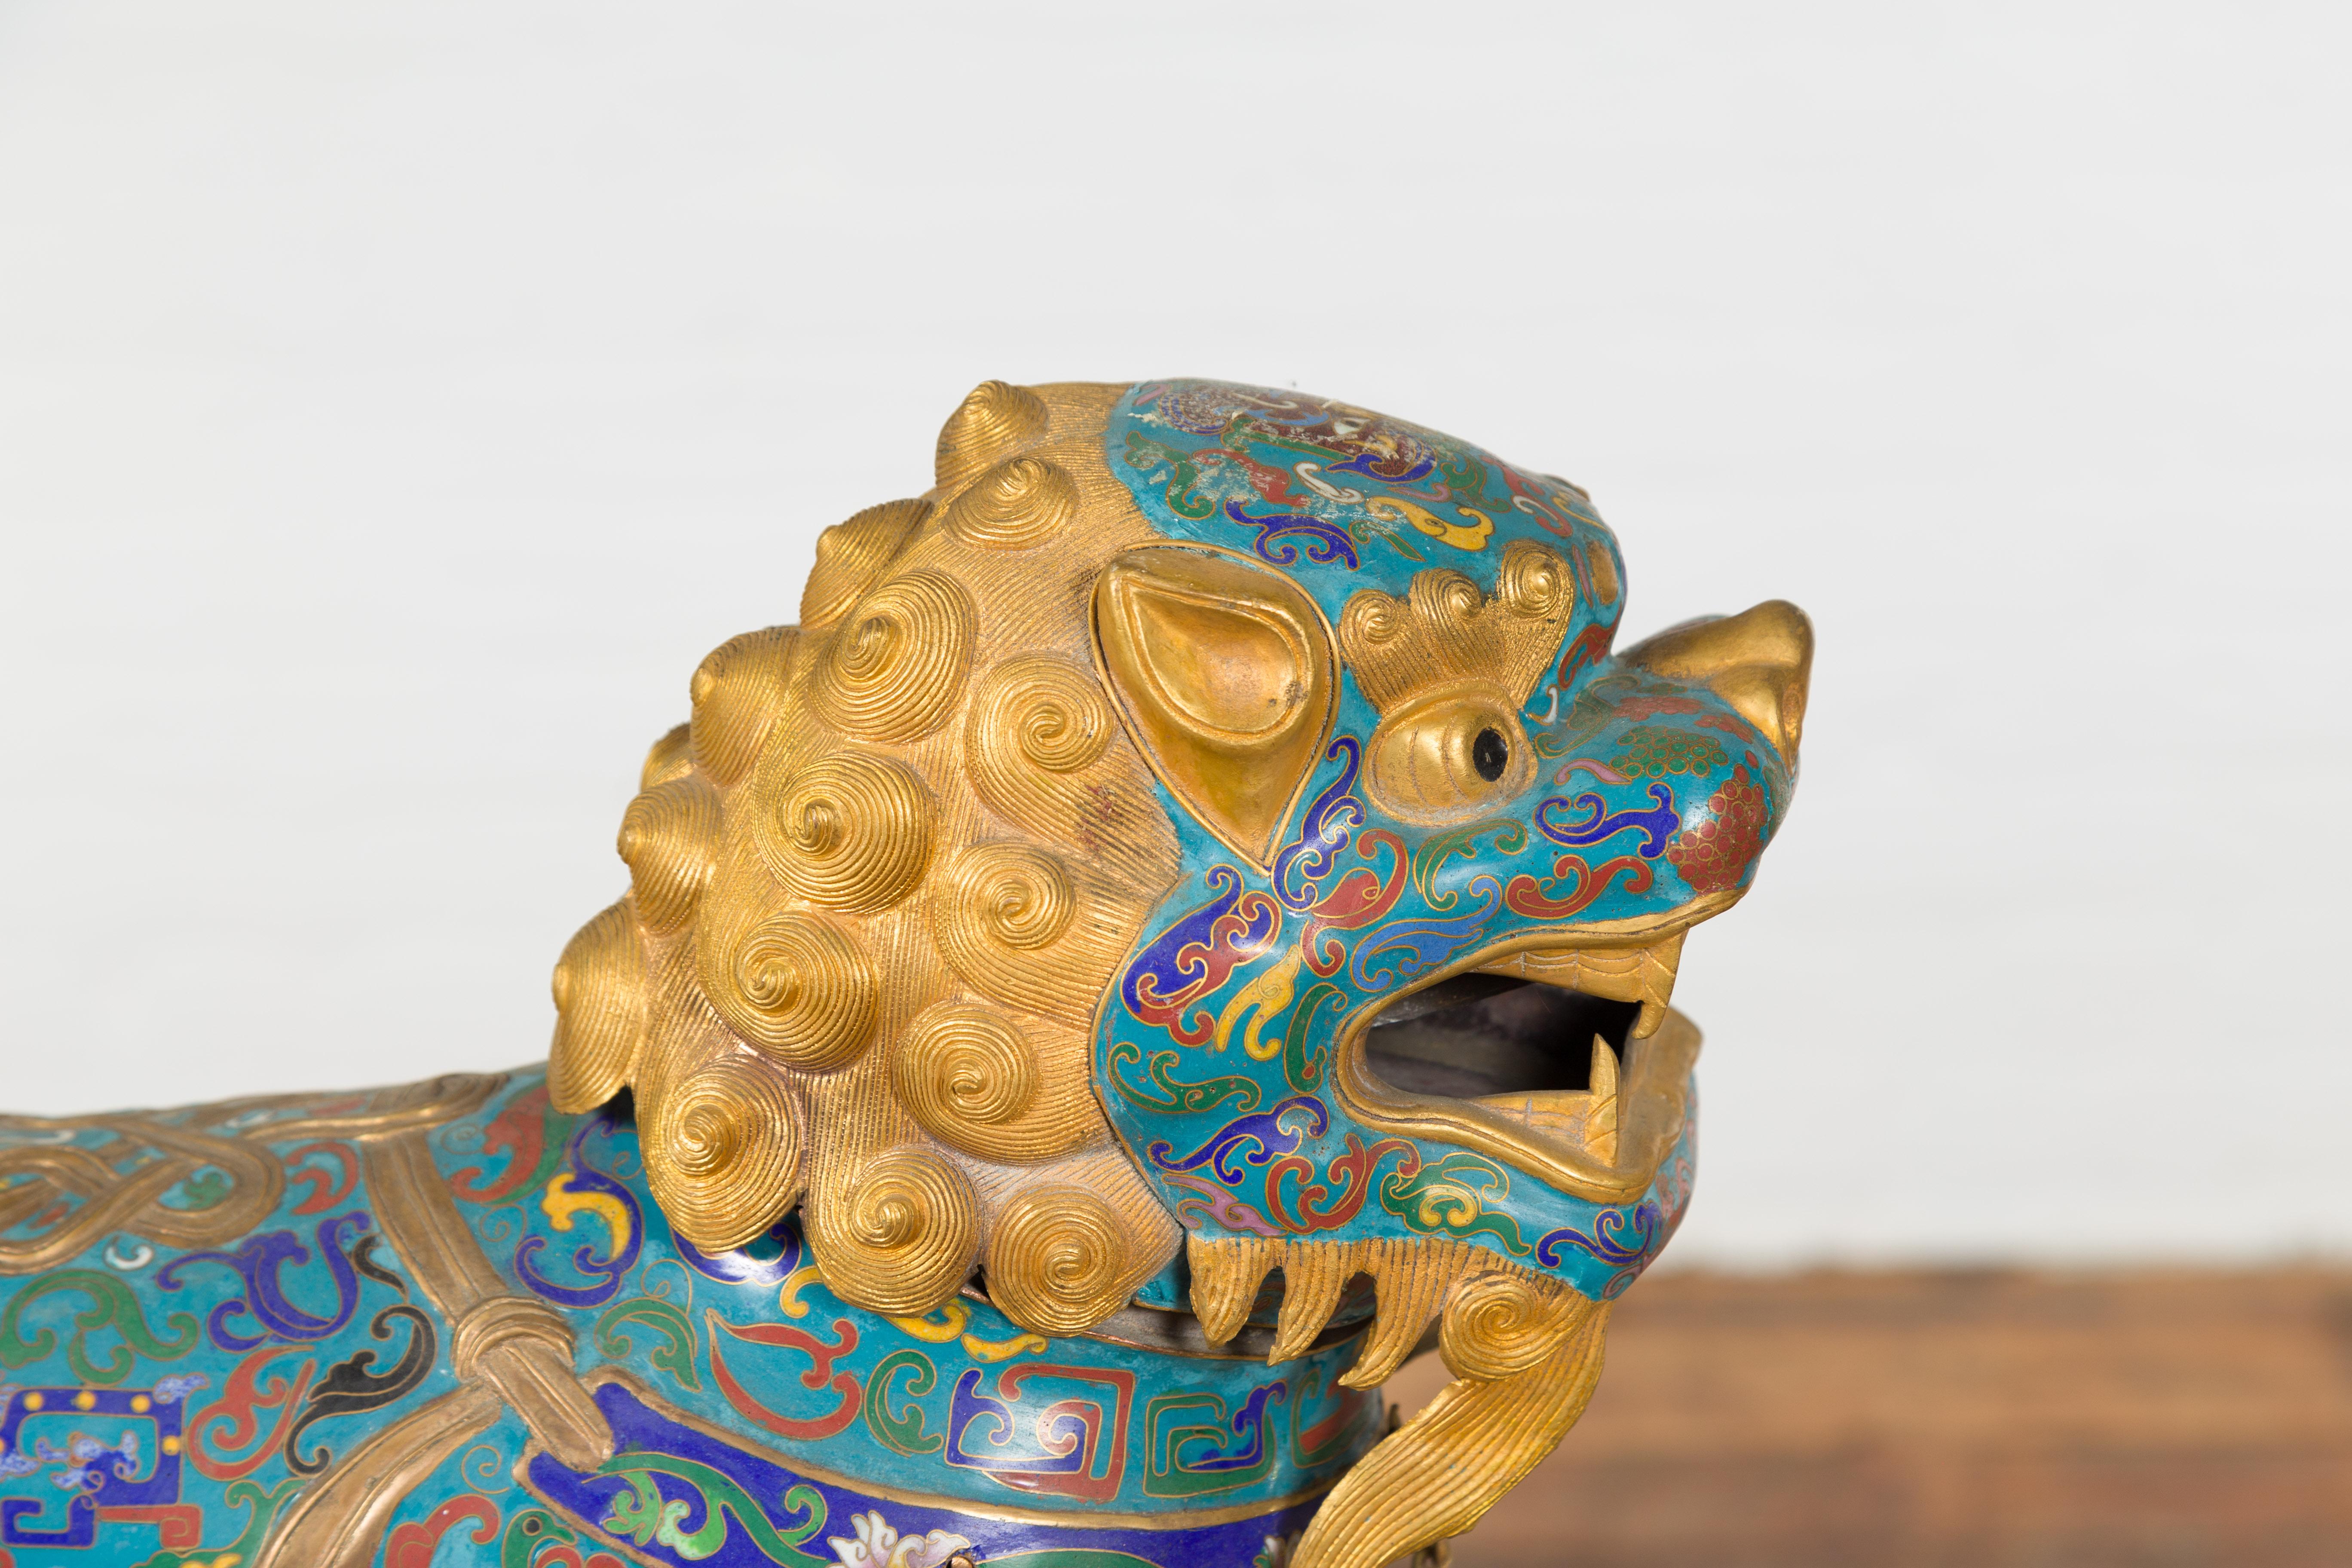 Chinese Vintage Metal Cloisonné Foo Dog Guardian Lion with Teal and Golden Tones 1